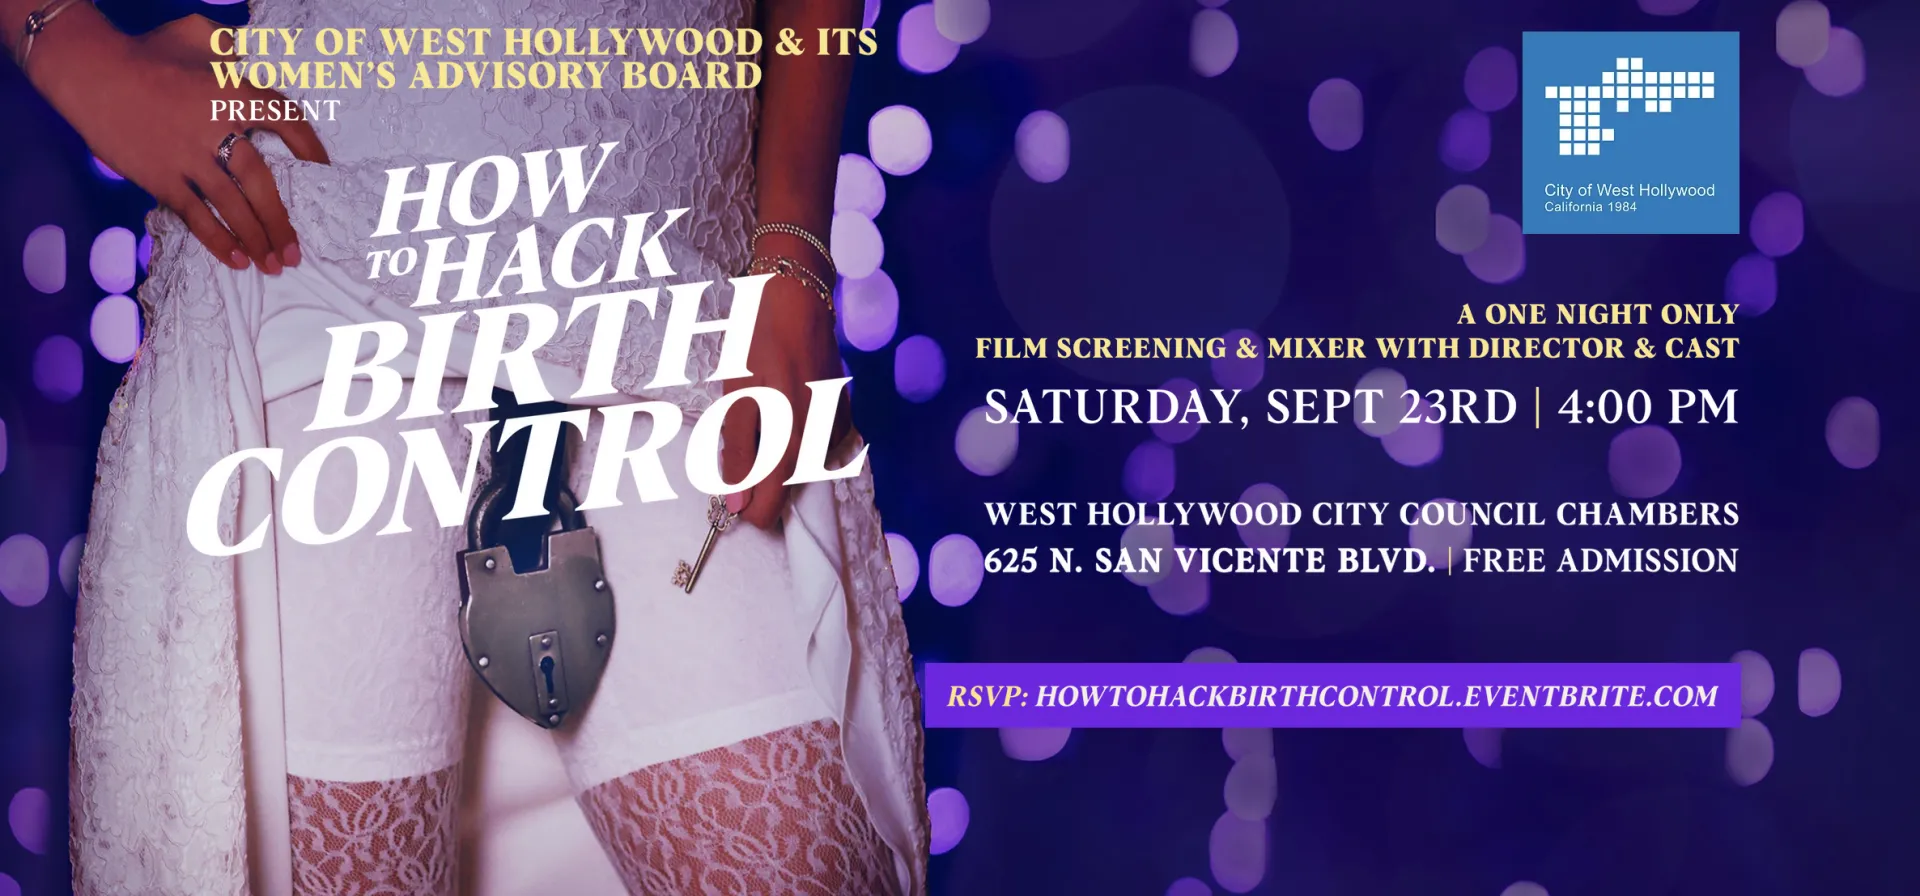 The City of West Hollywood Presents How to Hack Birth Control Film Screening & Mixer